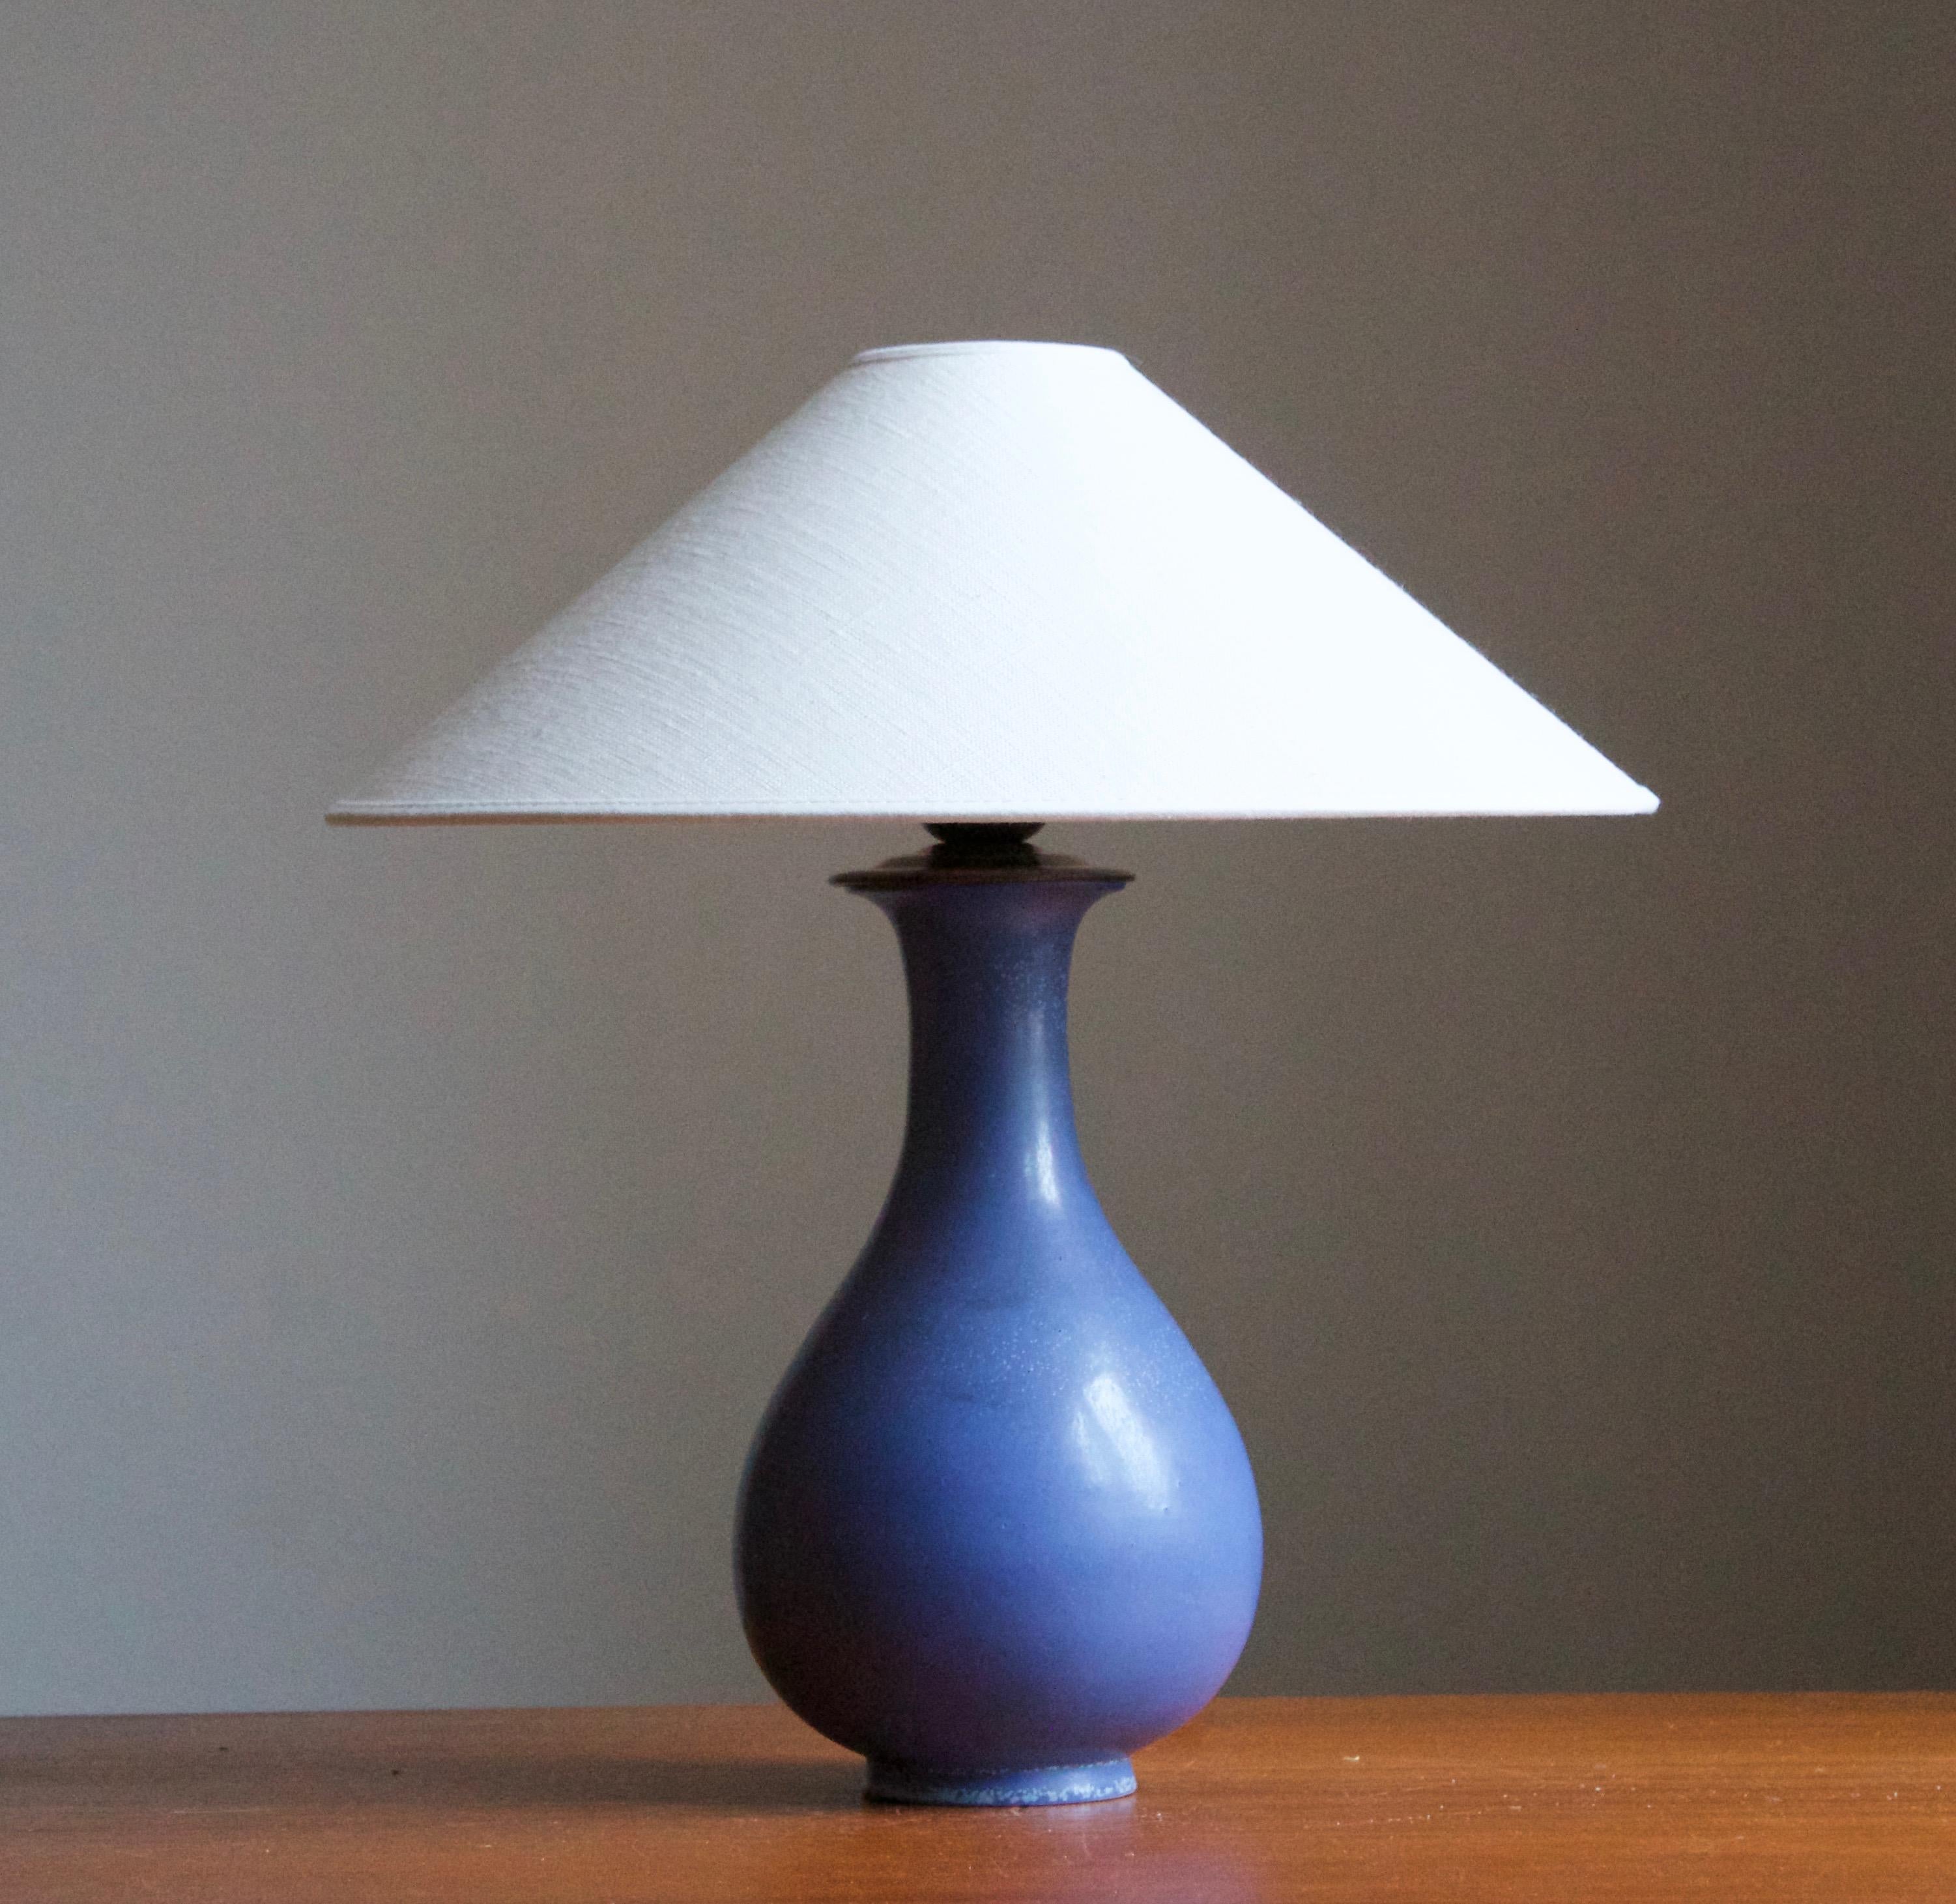 A table lamp produced by Rörstrand, Sweden, 1950s. Designed by Gunnar Nylund, (Swedish, 1914-1997). Signed. 

Sold without lampshade. Stated dimensions exclude lampshade, height includes socket.

Nylund served as artistic director at Rörstrand,